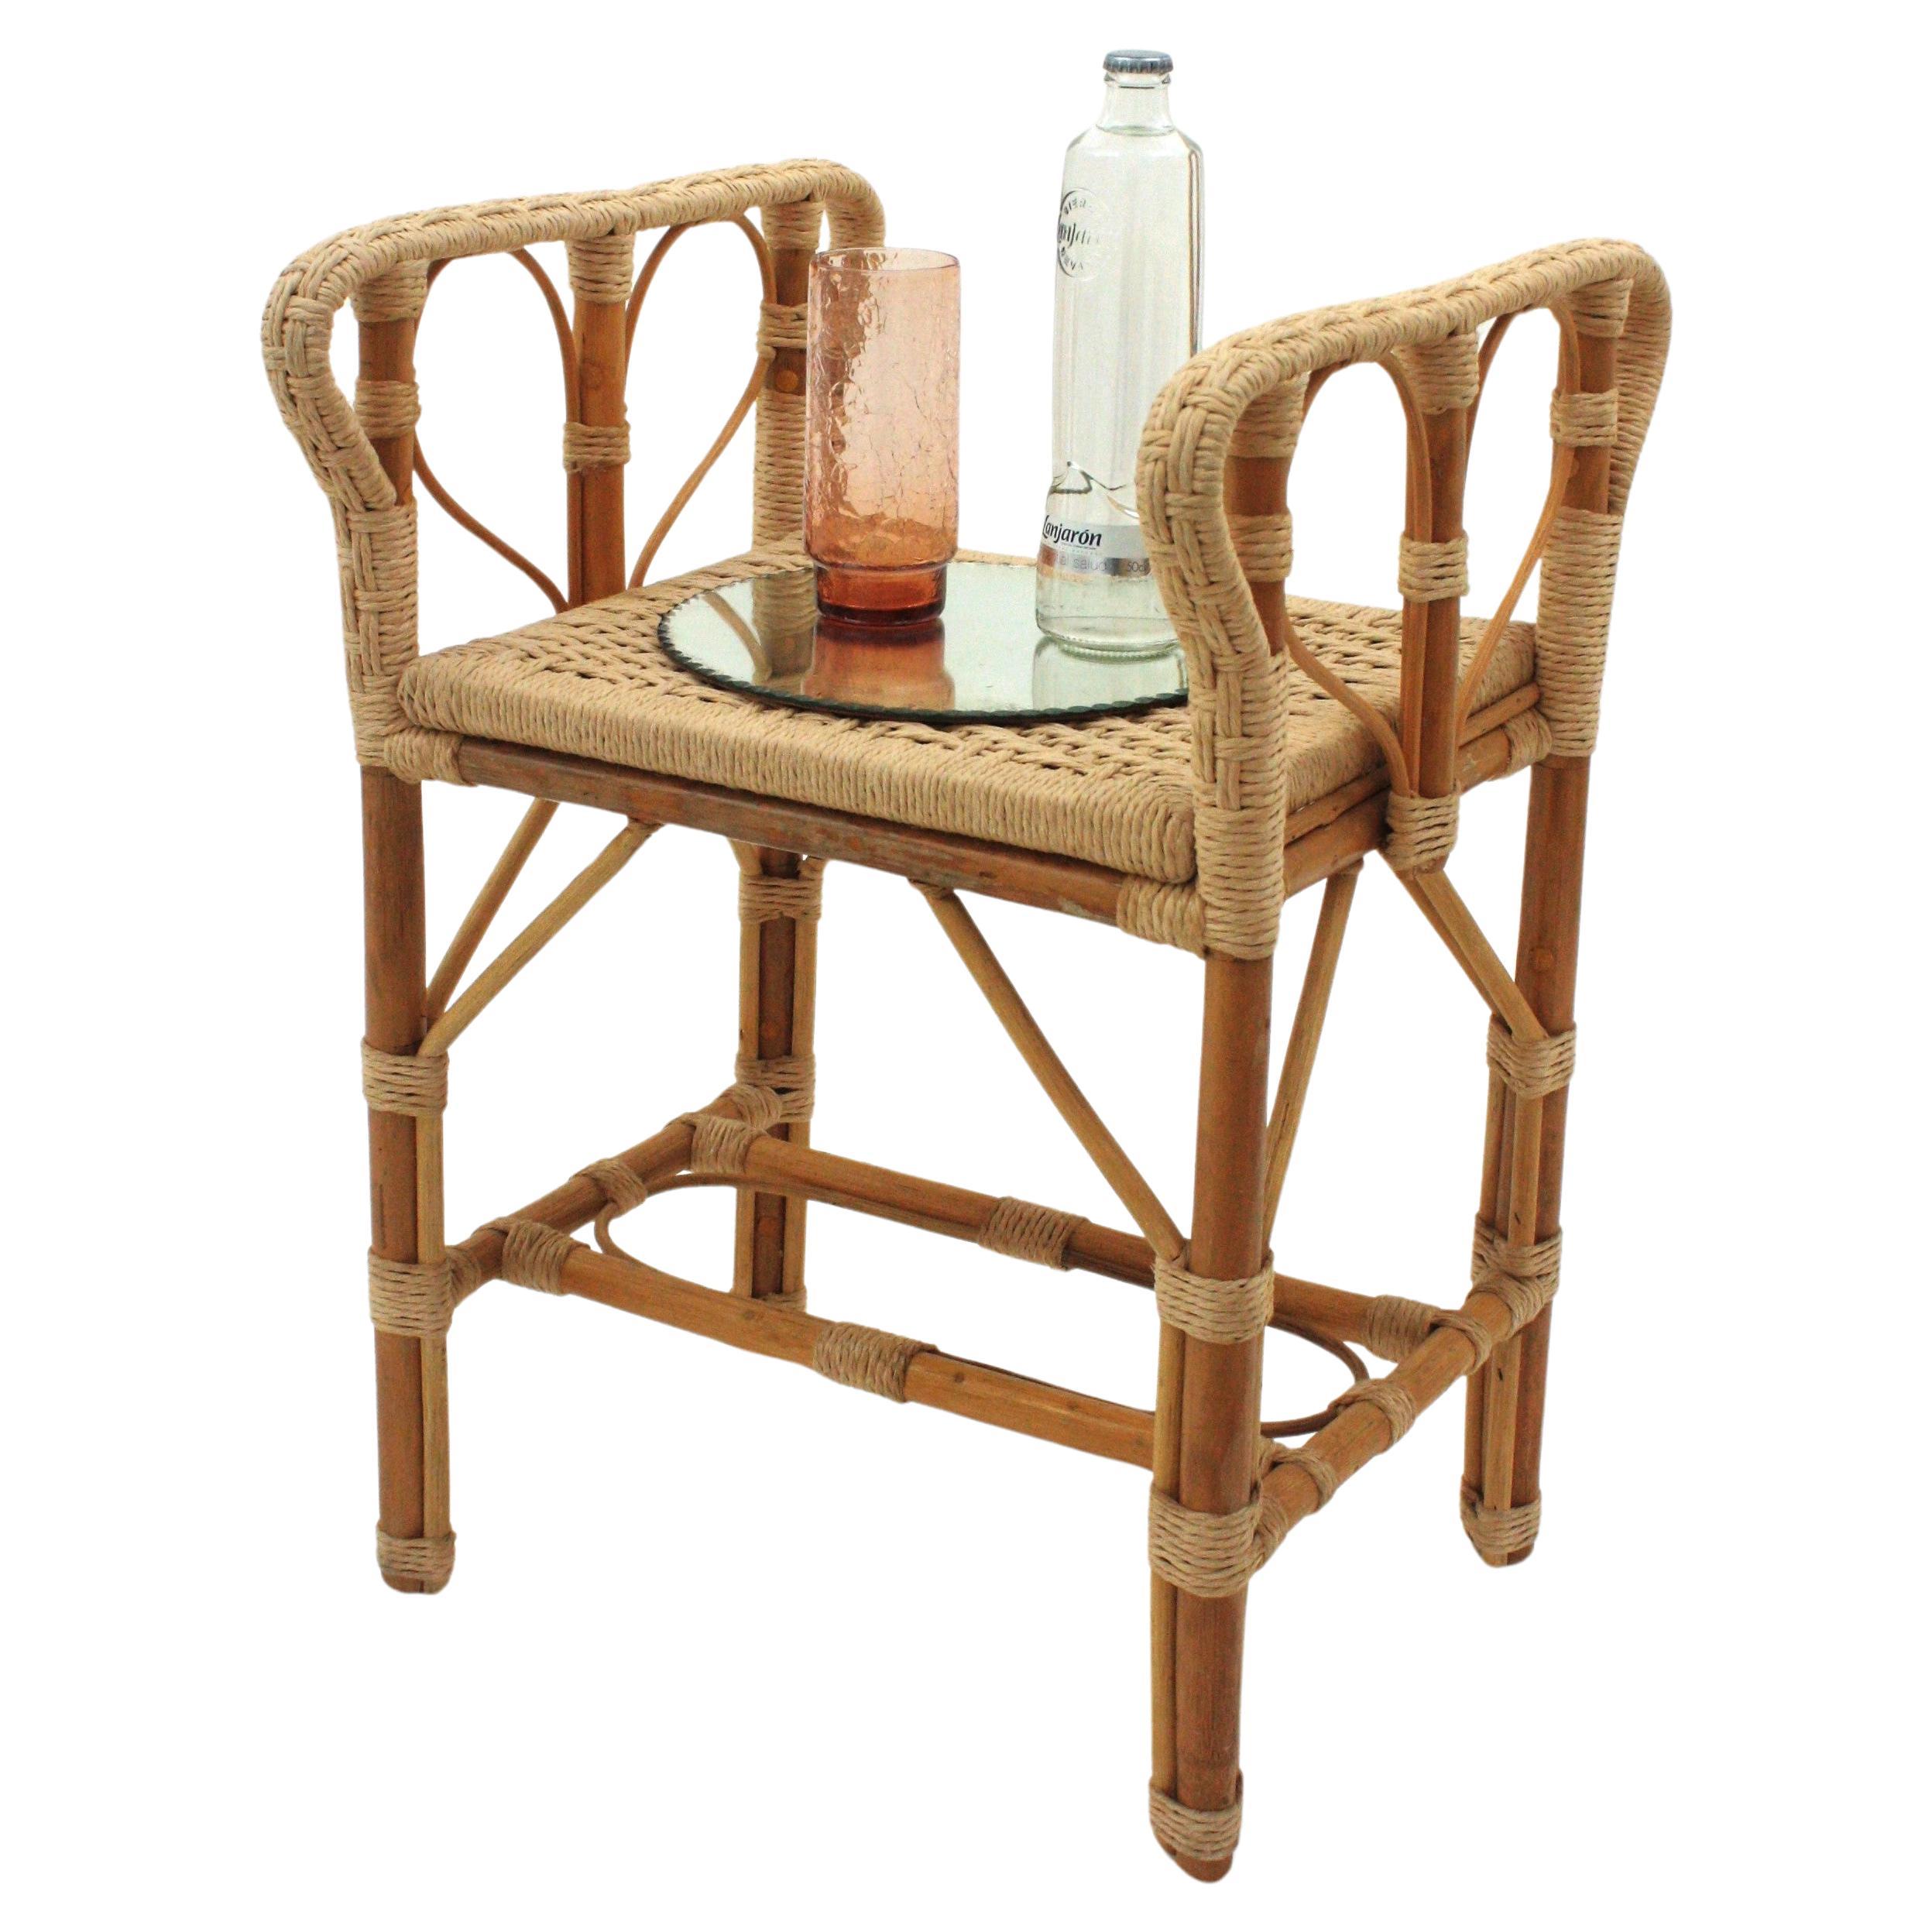 Stool with Arms / Throne Stool, Rattan, Rope
Hand-Braided rope and rattan rectangular stool or side table. Spain, 1960s.
Rare find.
On a rattan and bamboo structure this rectangular stool was upholstered with an artisan hand-woven rope work.
Rope is